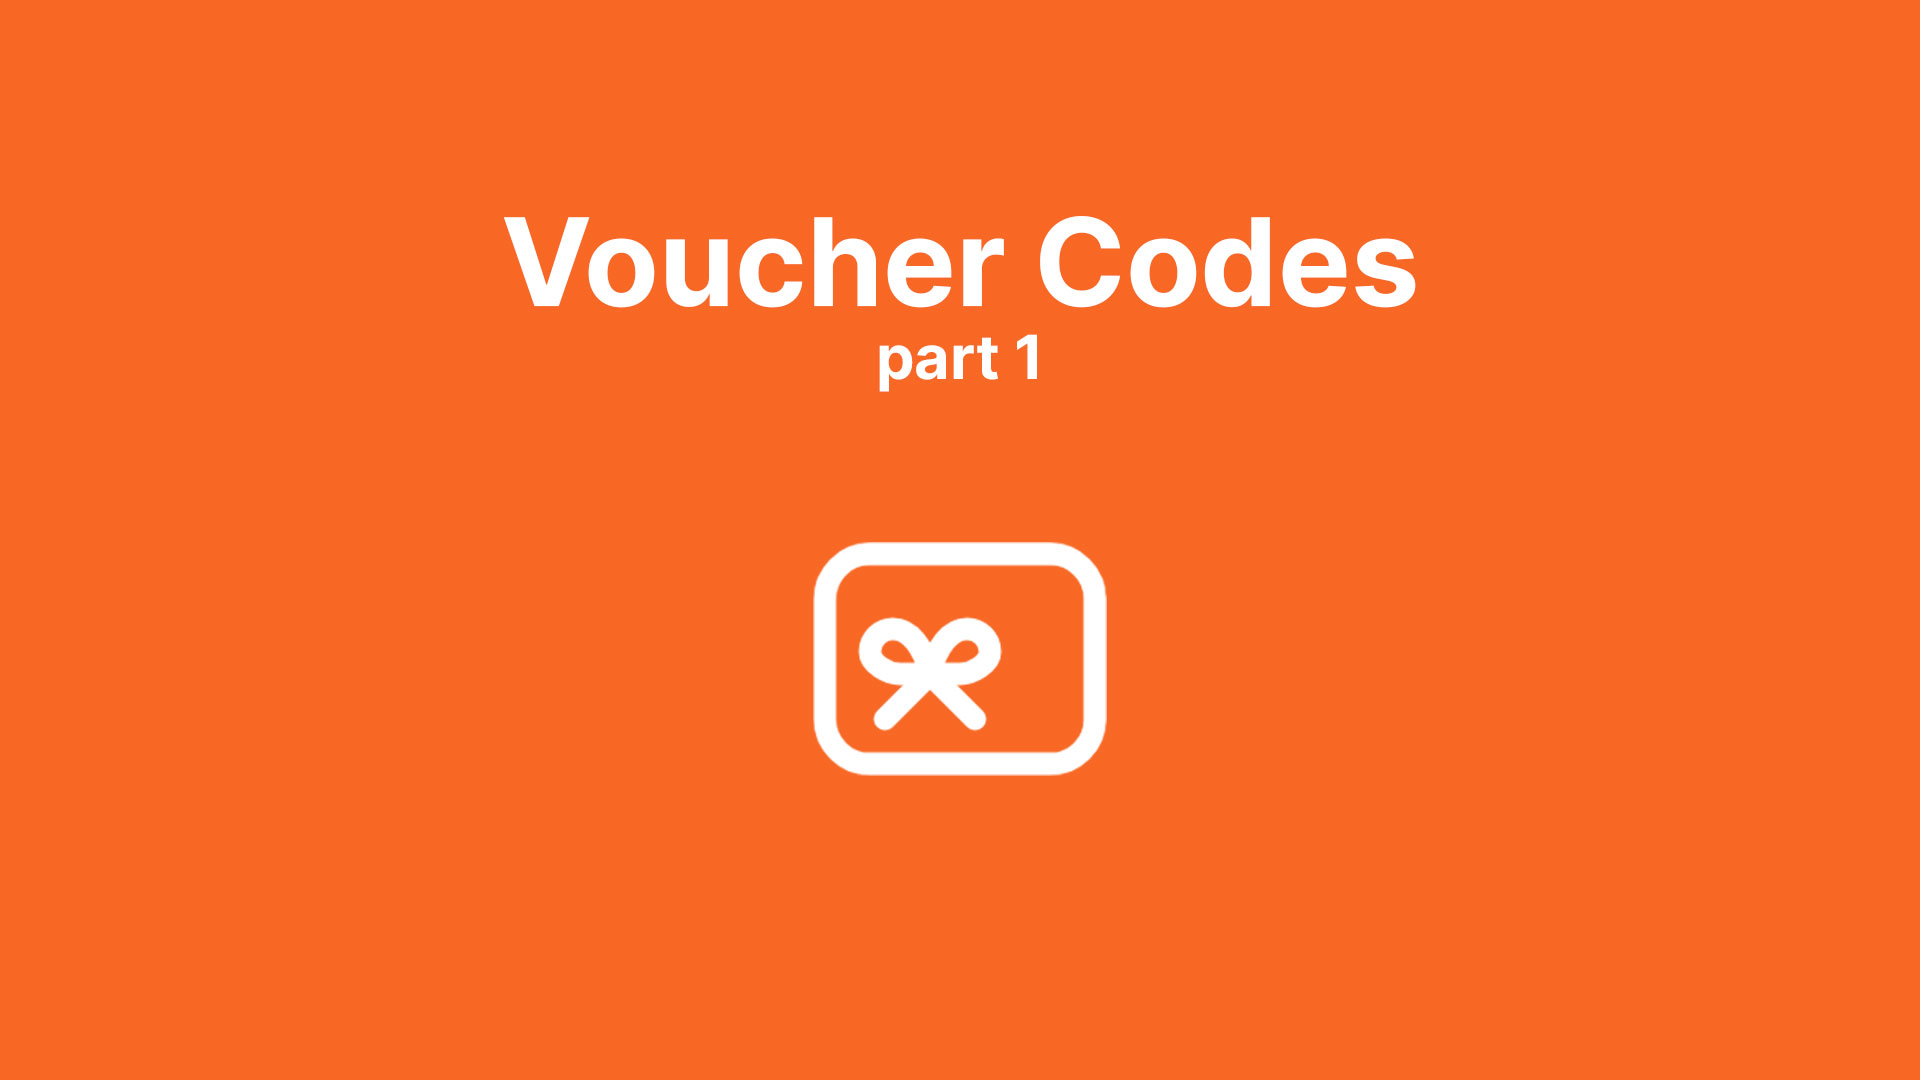 Create voucher codes in Dynamics Customer Insights - Journeys for marketing campaigns.